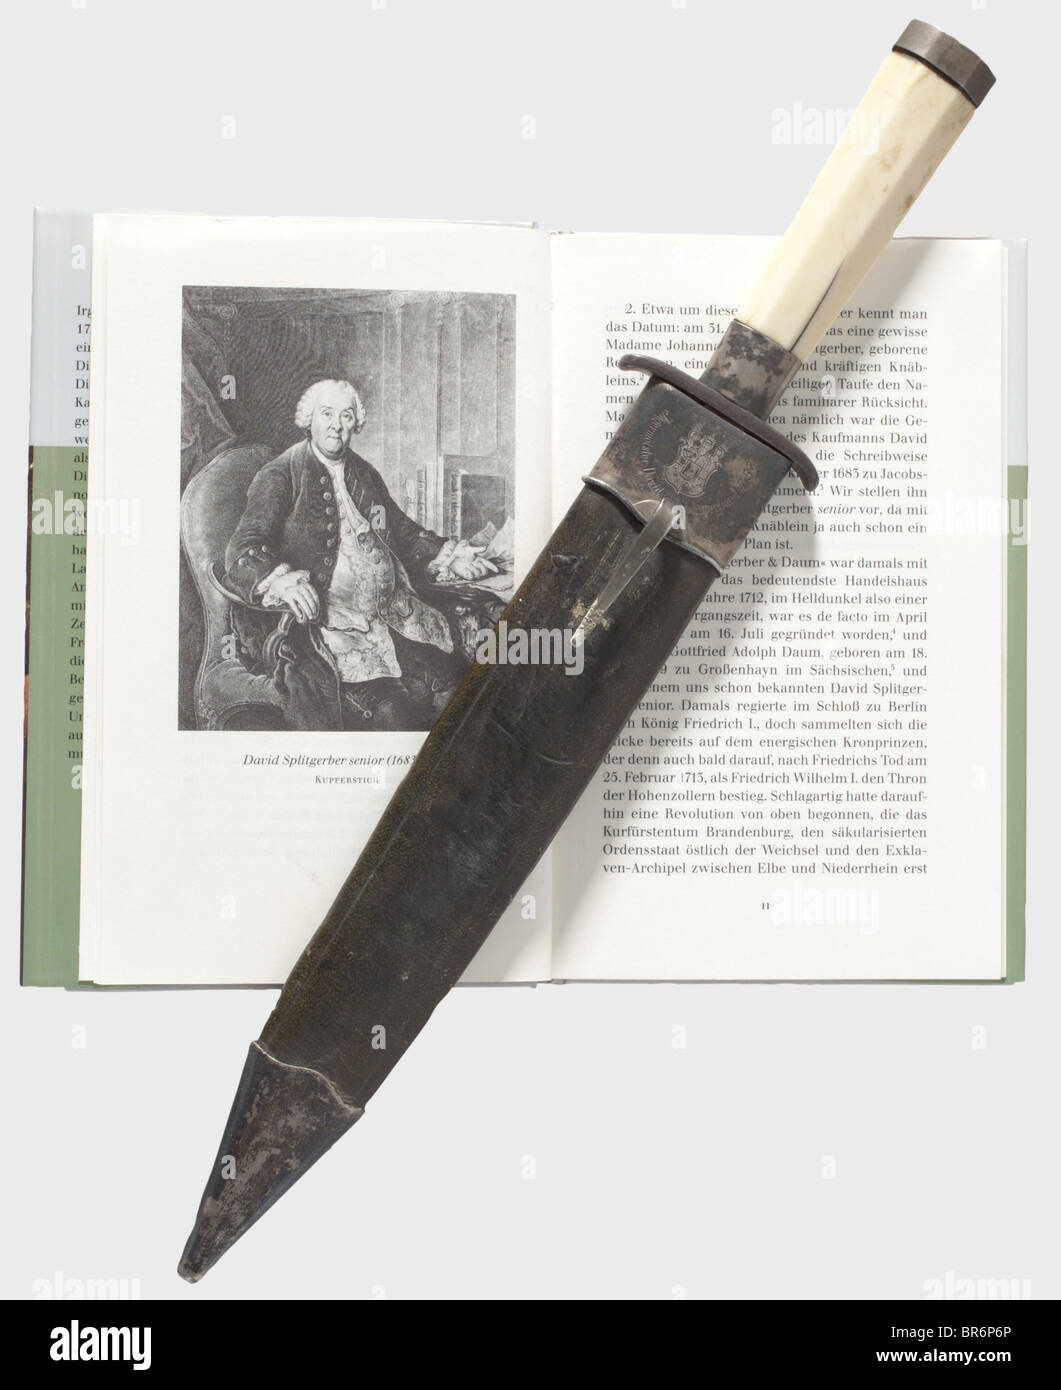 A hunting dagger., Single-edged blade with a double-edged point. Simple iron quillons, conical bone-grip, silver ferrule and pommel-cap. Length 36 cm. Leather scabbard with silver mounts. On the obverse side an engraved coat of arms and the inscription 'Jägermeister David von Splitgerber 1857', the reverse showing a coat of arms and 'Garde Jäger-Hauptmann Eric von Witzleben 1857'. David von Splitgerber (1683 - 1764) was an entrepreneur in Berlin, canon of Caminn and master hunter to Prince Ferdinand of Prussia. Eric of Witzleben (1847 - 1919) was a Prussian maj, Stock Photo